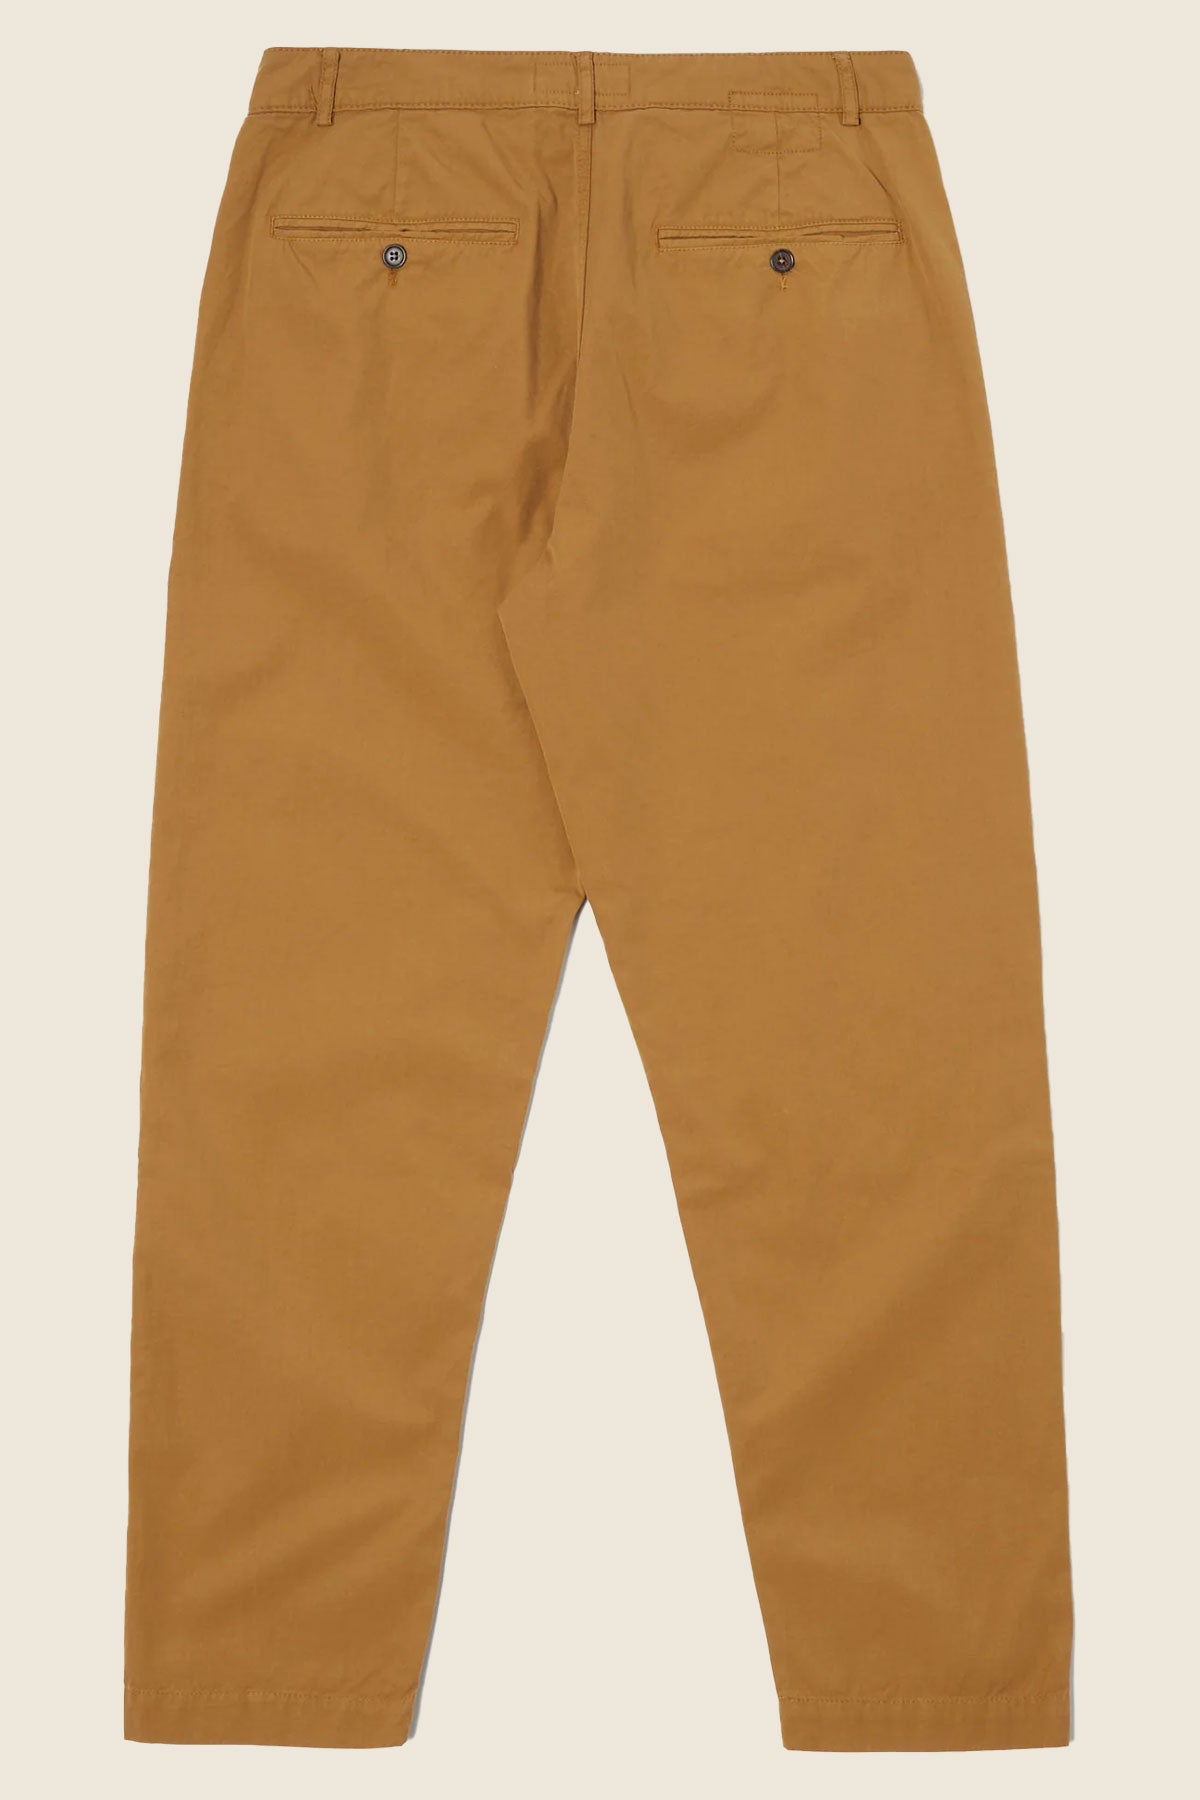 Universal Works - Military Chino In Cumin Summer Canvas